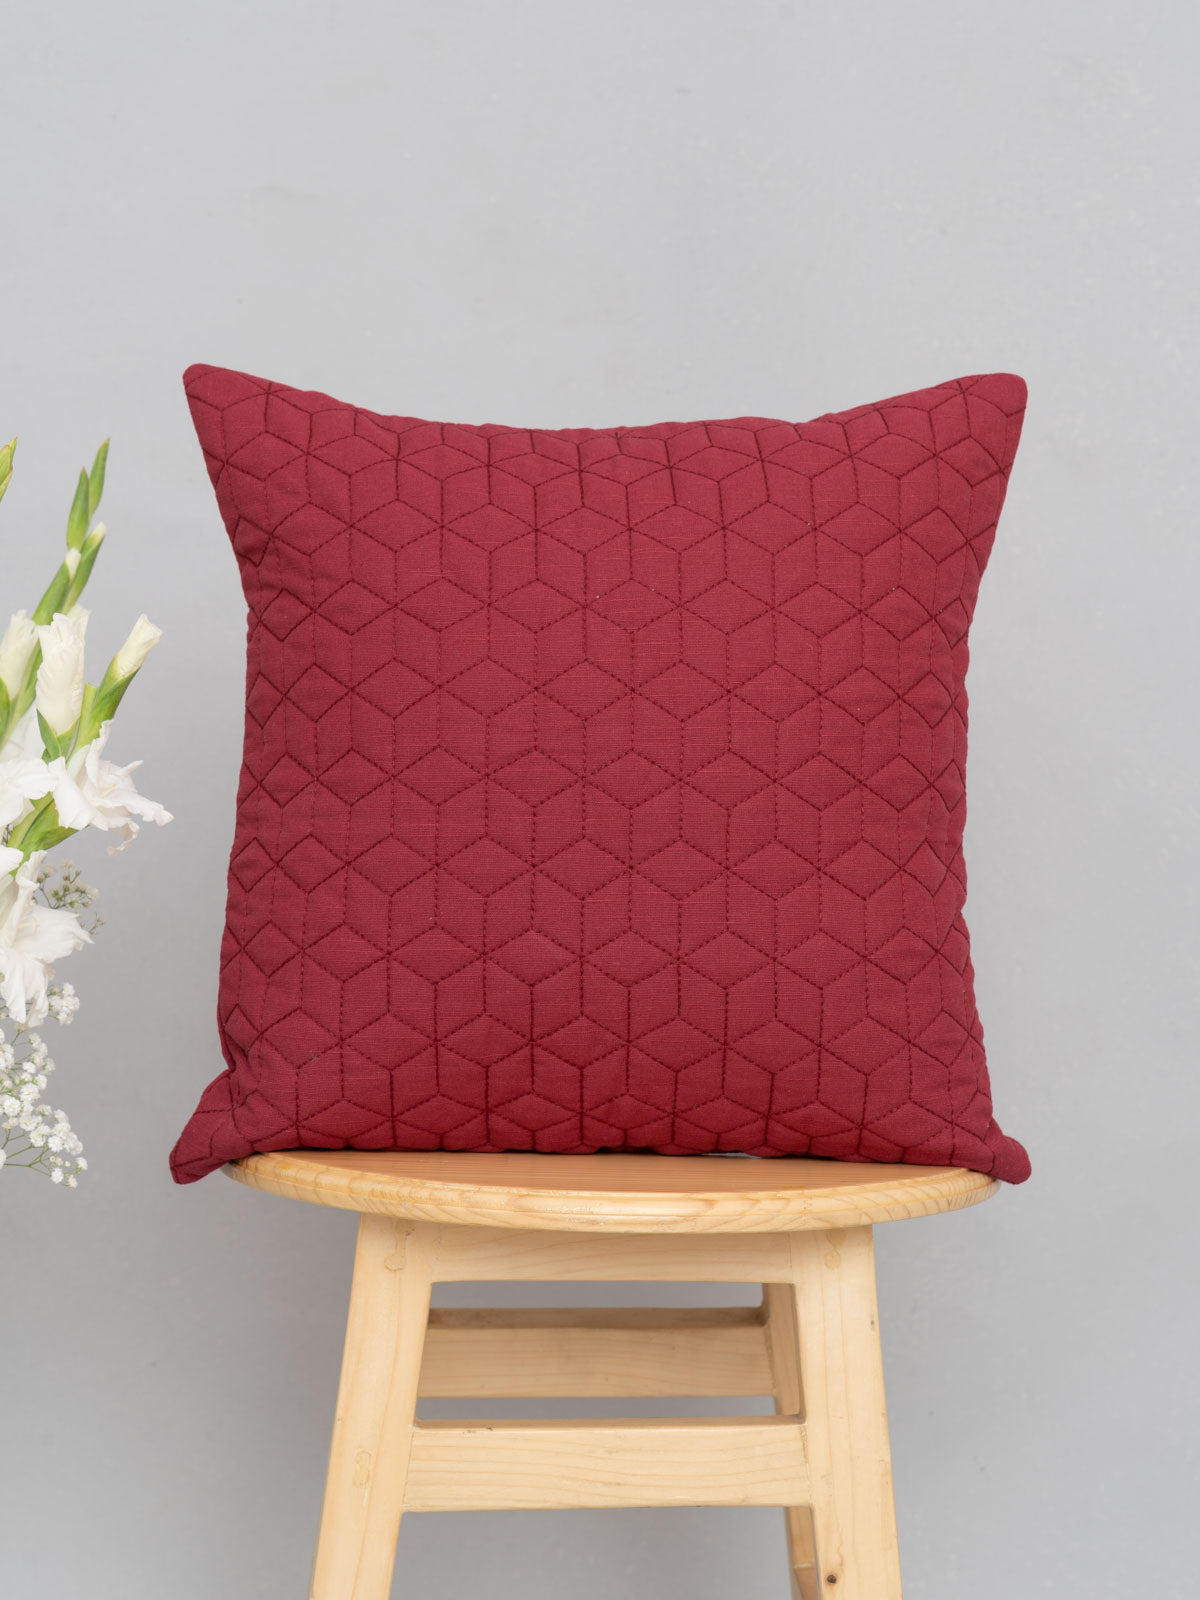 Wild Roses, Climbing Roses , Wine Red Quilted , Gingham Sage Green Set Of 4 Combo Cotton Cushion Cover - Wine Red And Sage Green